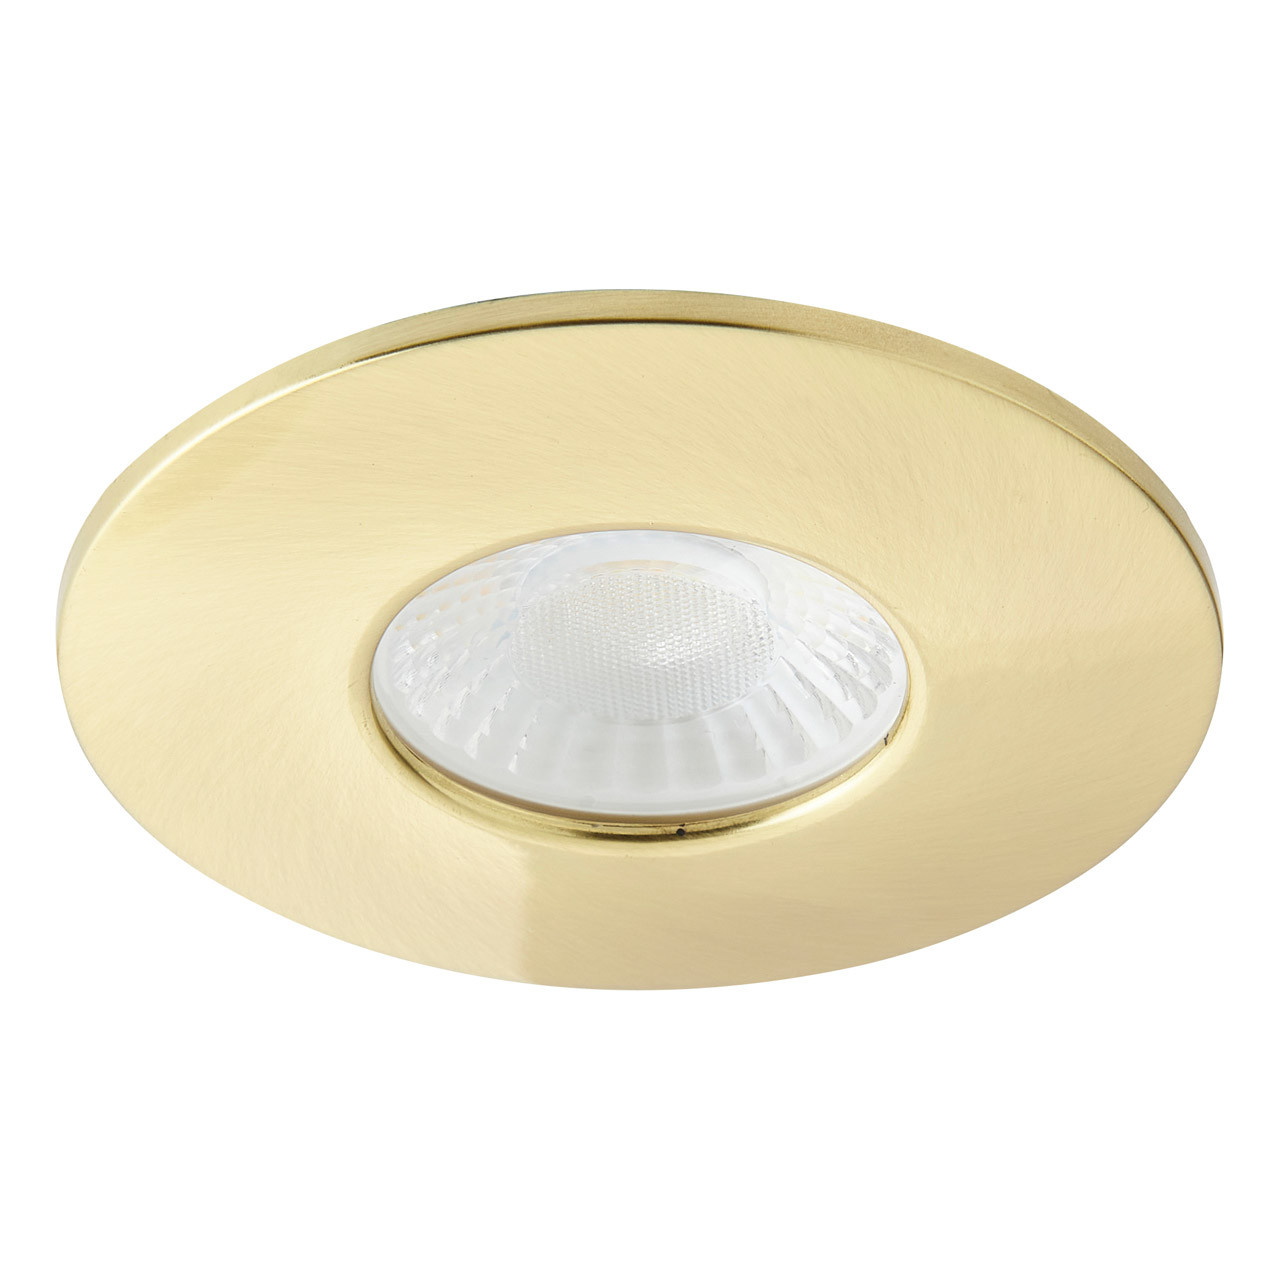 Photos - Chandelier / Lamp SPA Rhom LED Fire Rated Downlight 8W Dimmable IP65 Tri-Colour CCT Satin Br 